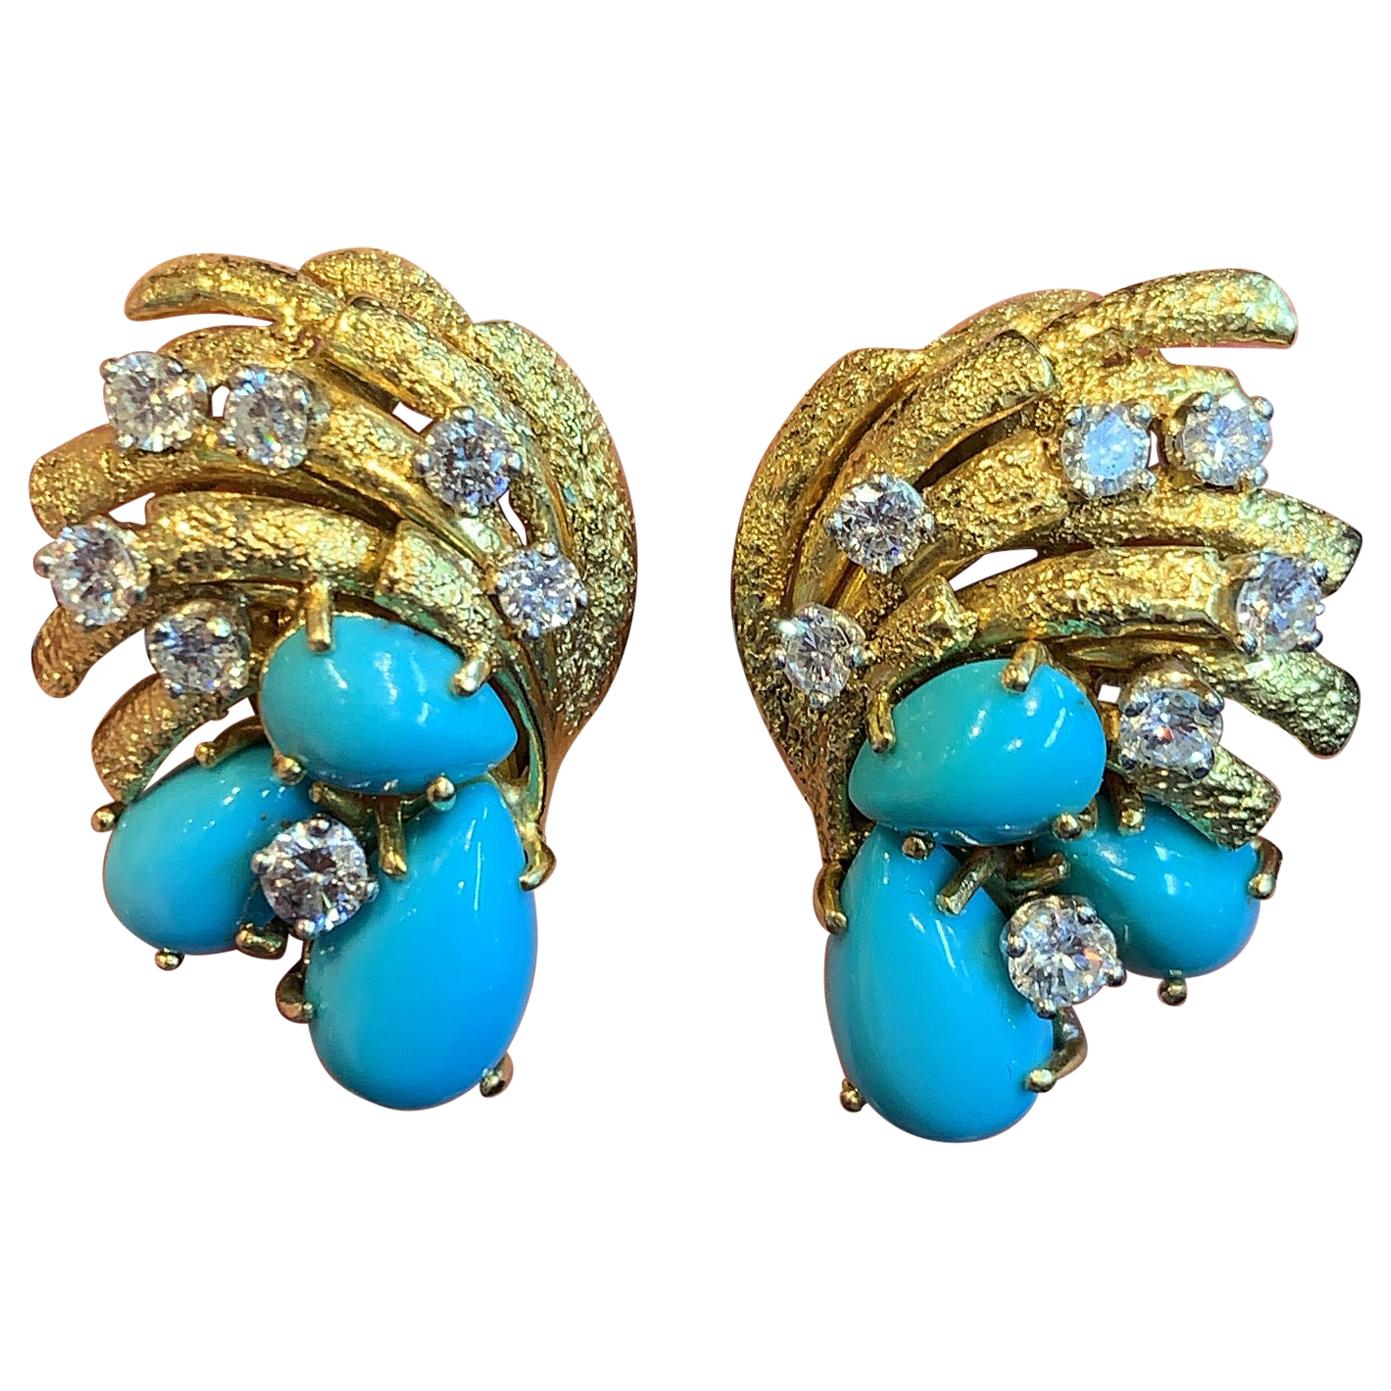 Cartier Turquoise and Diamond Earrings